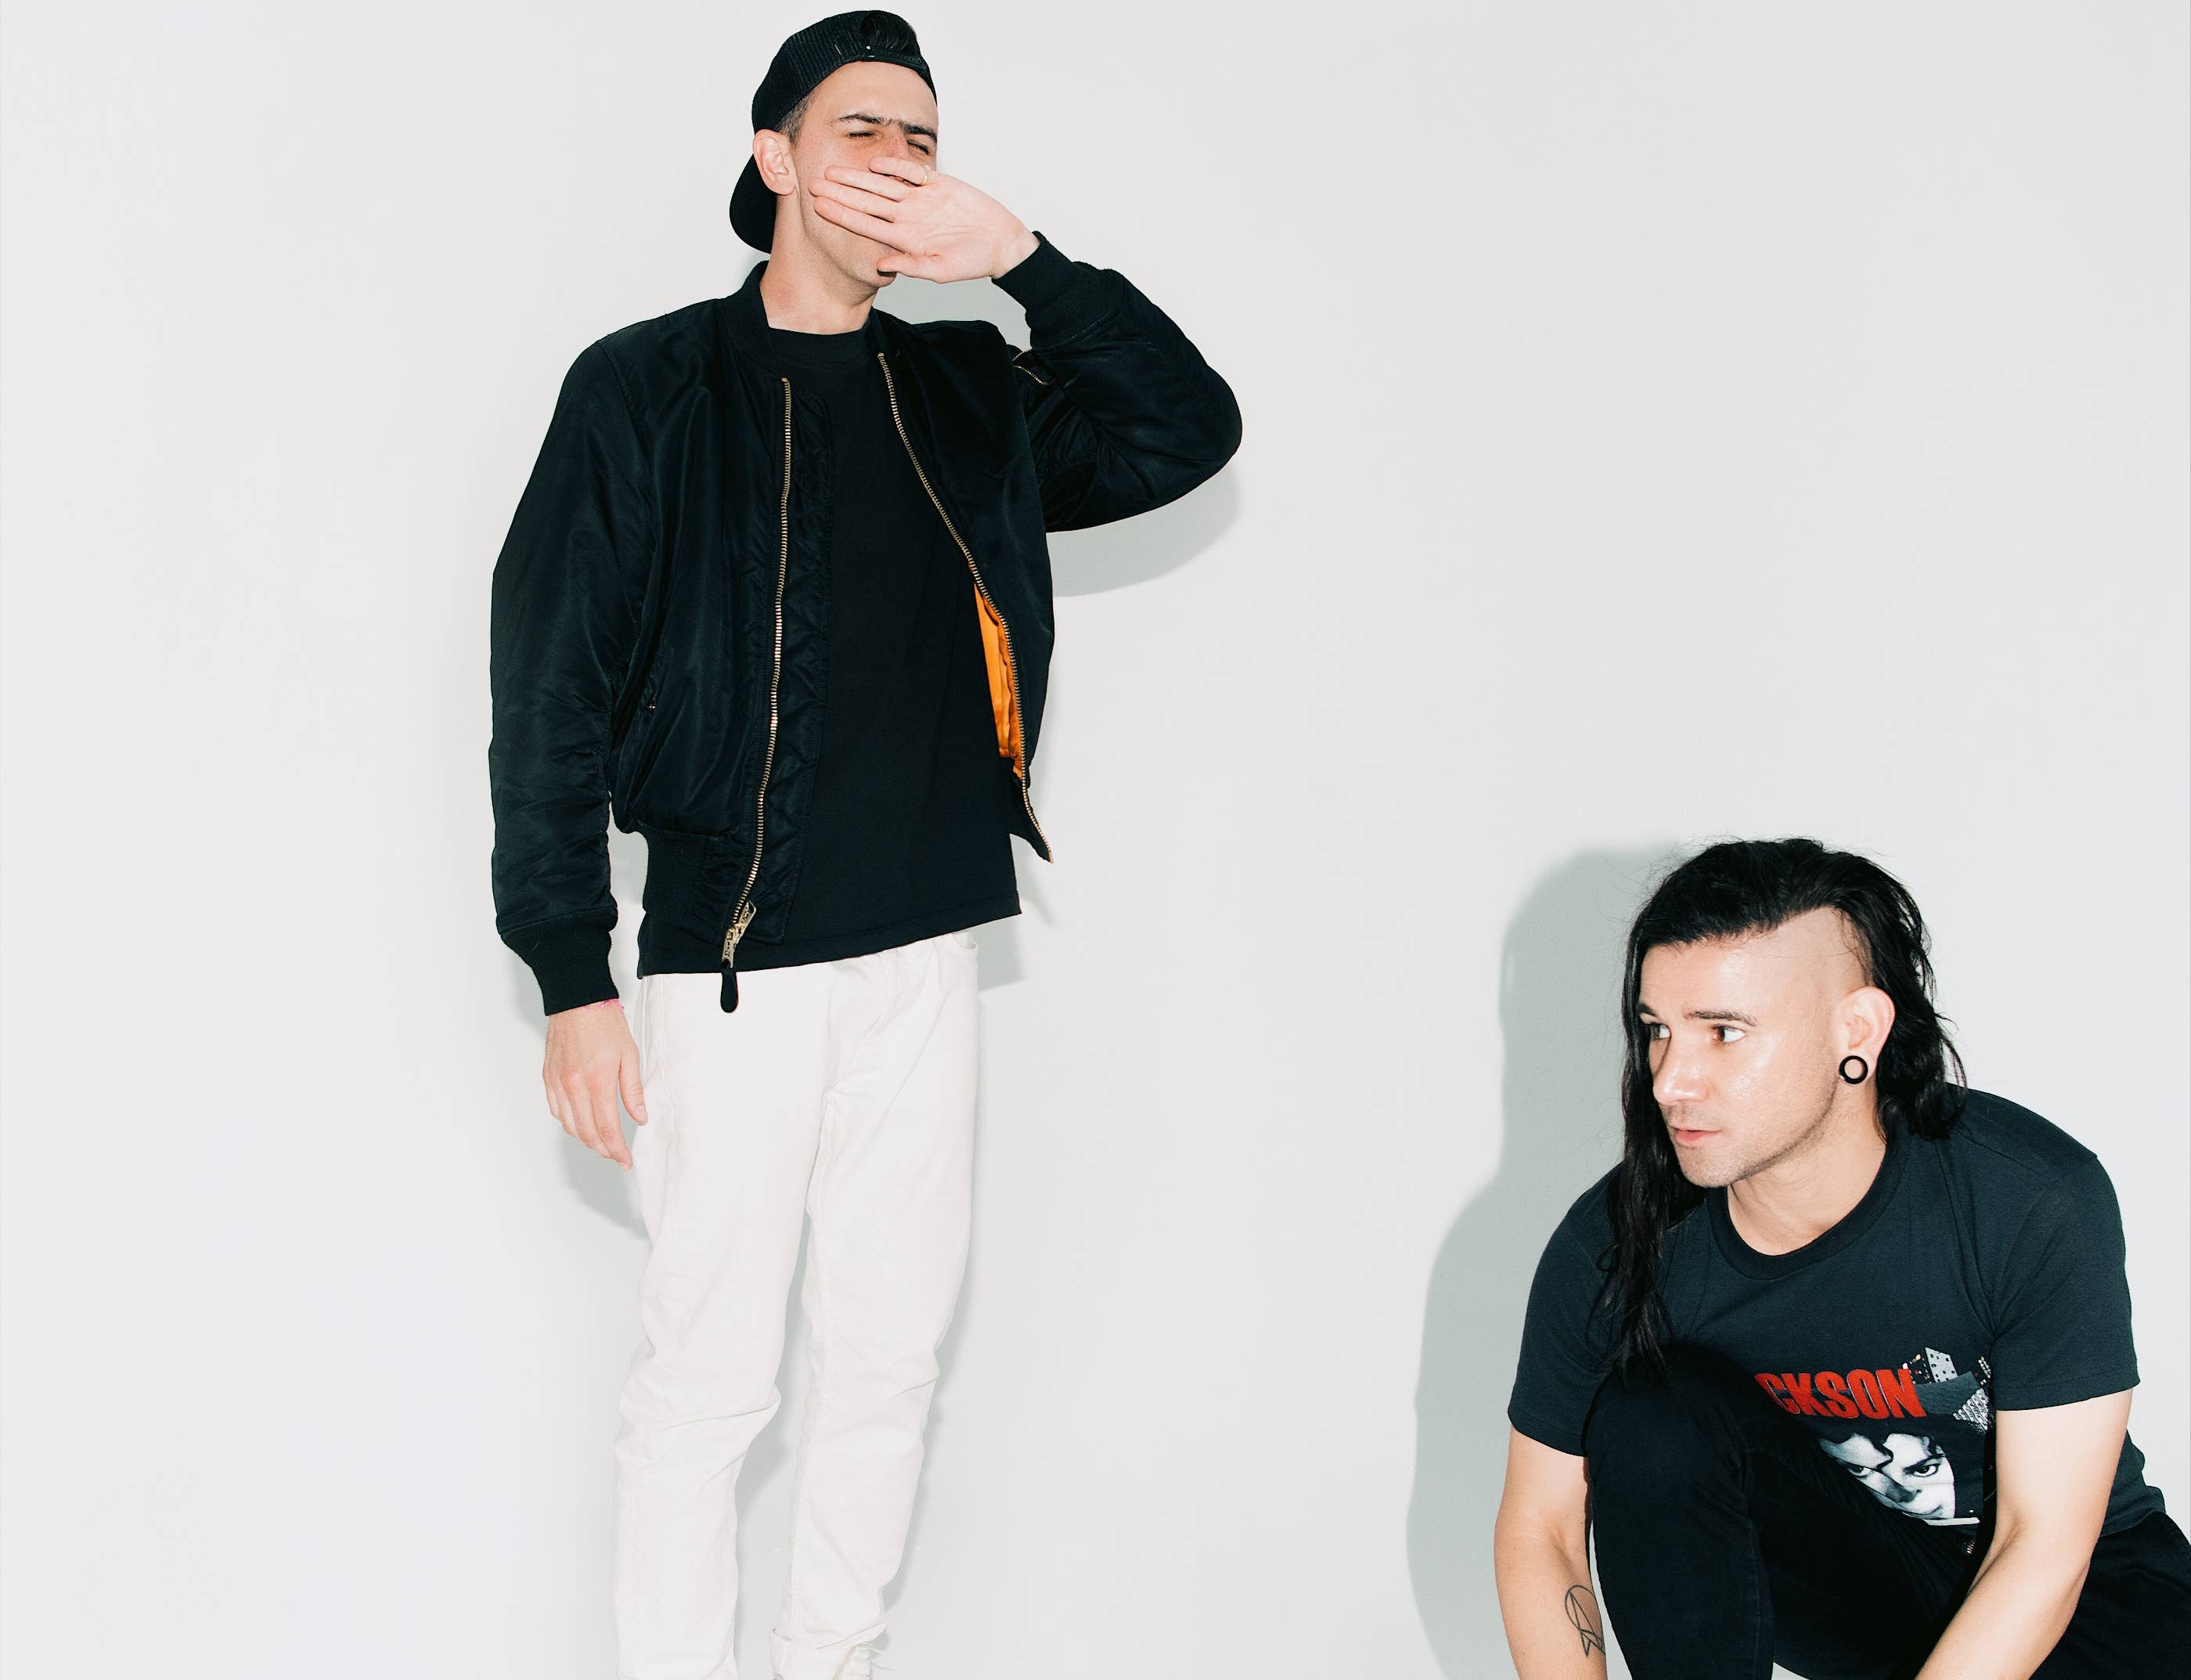 Skrillex and Boys Noize are Dog Blood